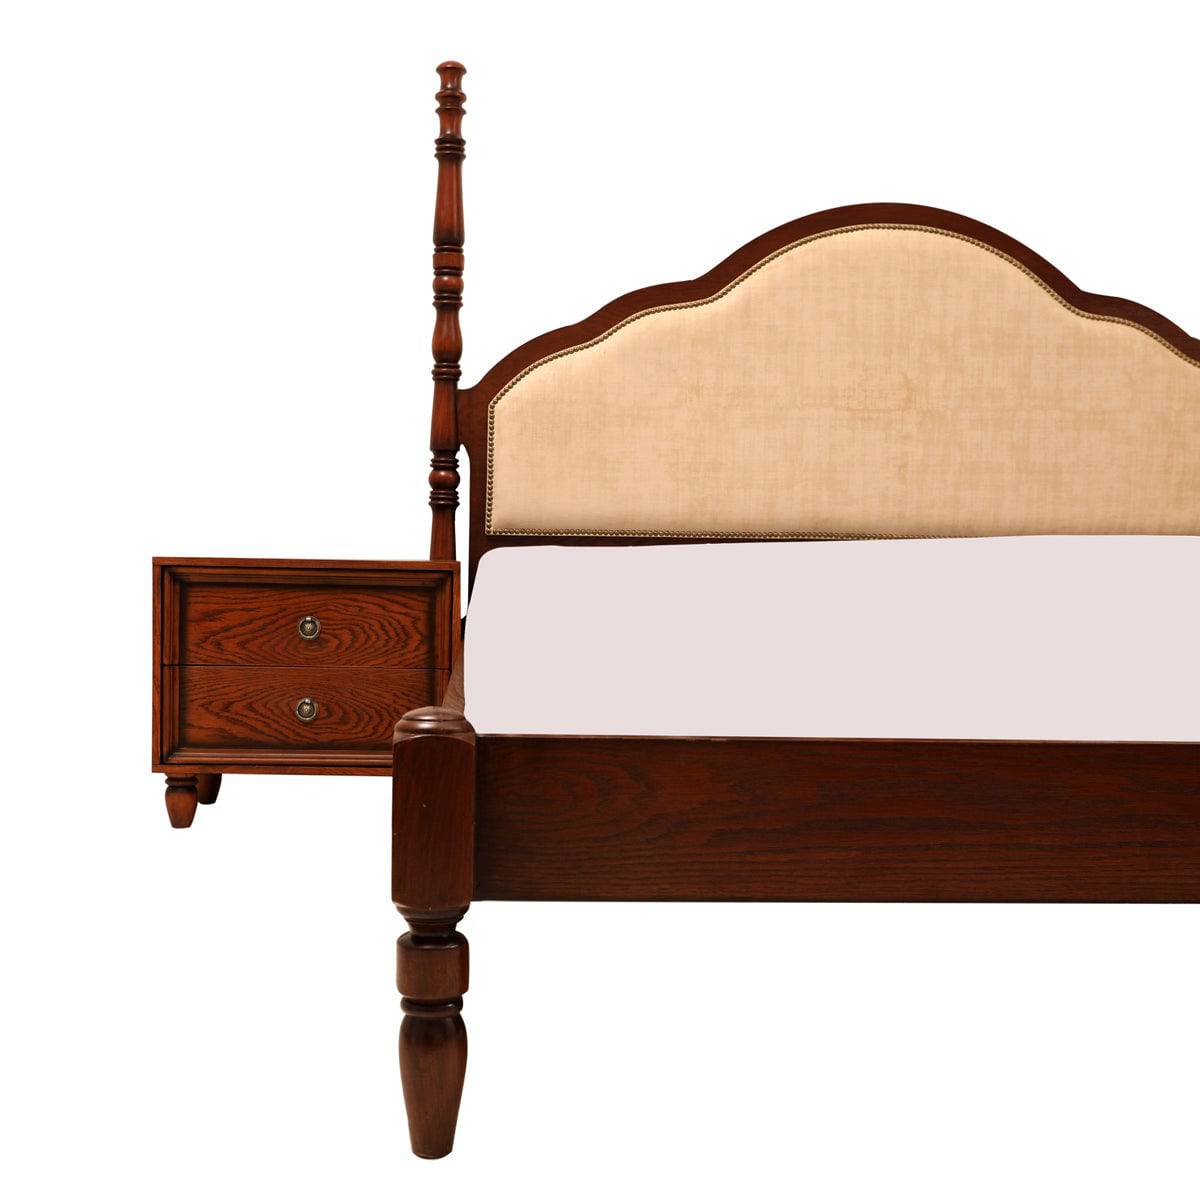 Jordan Bed with two Side Tables